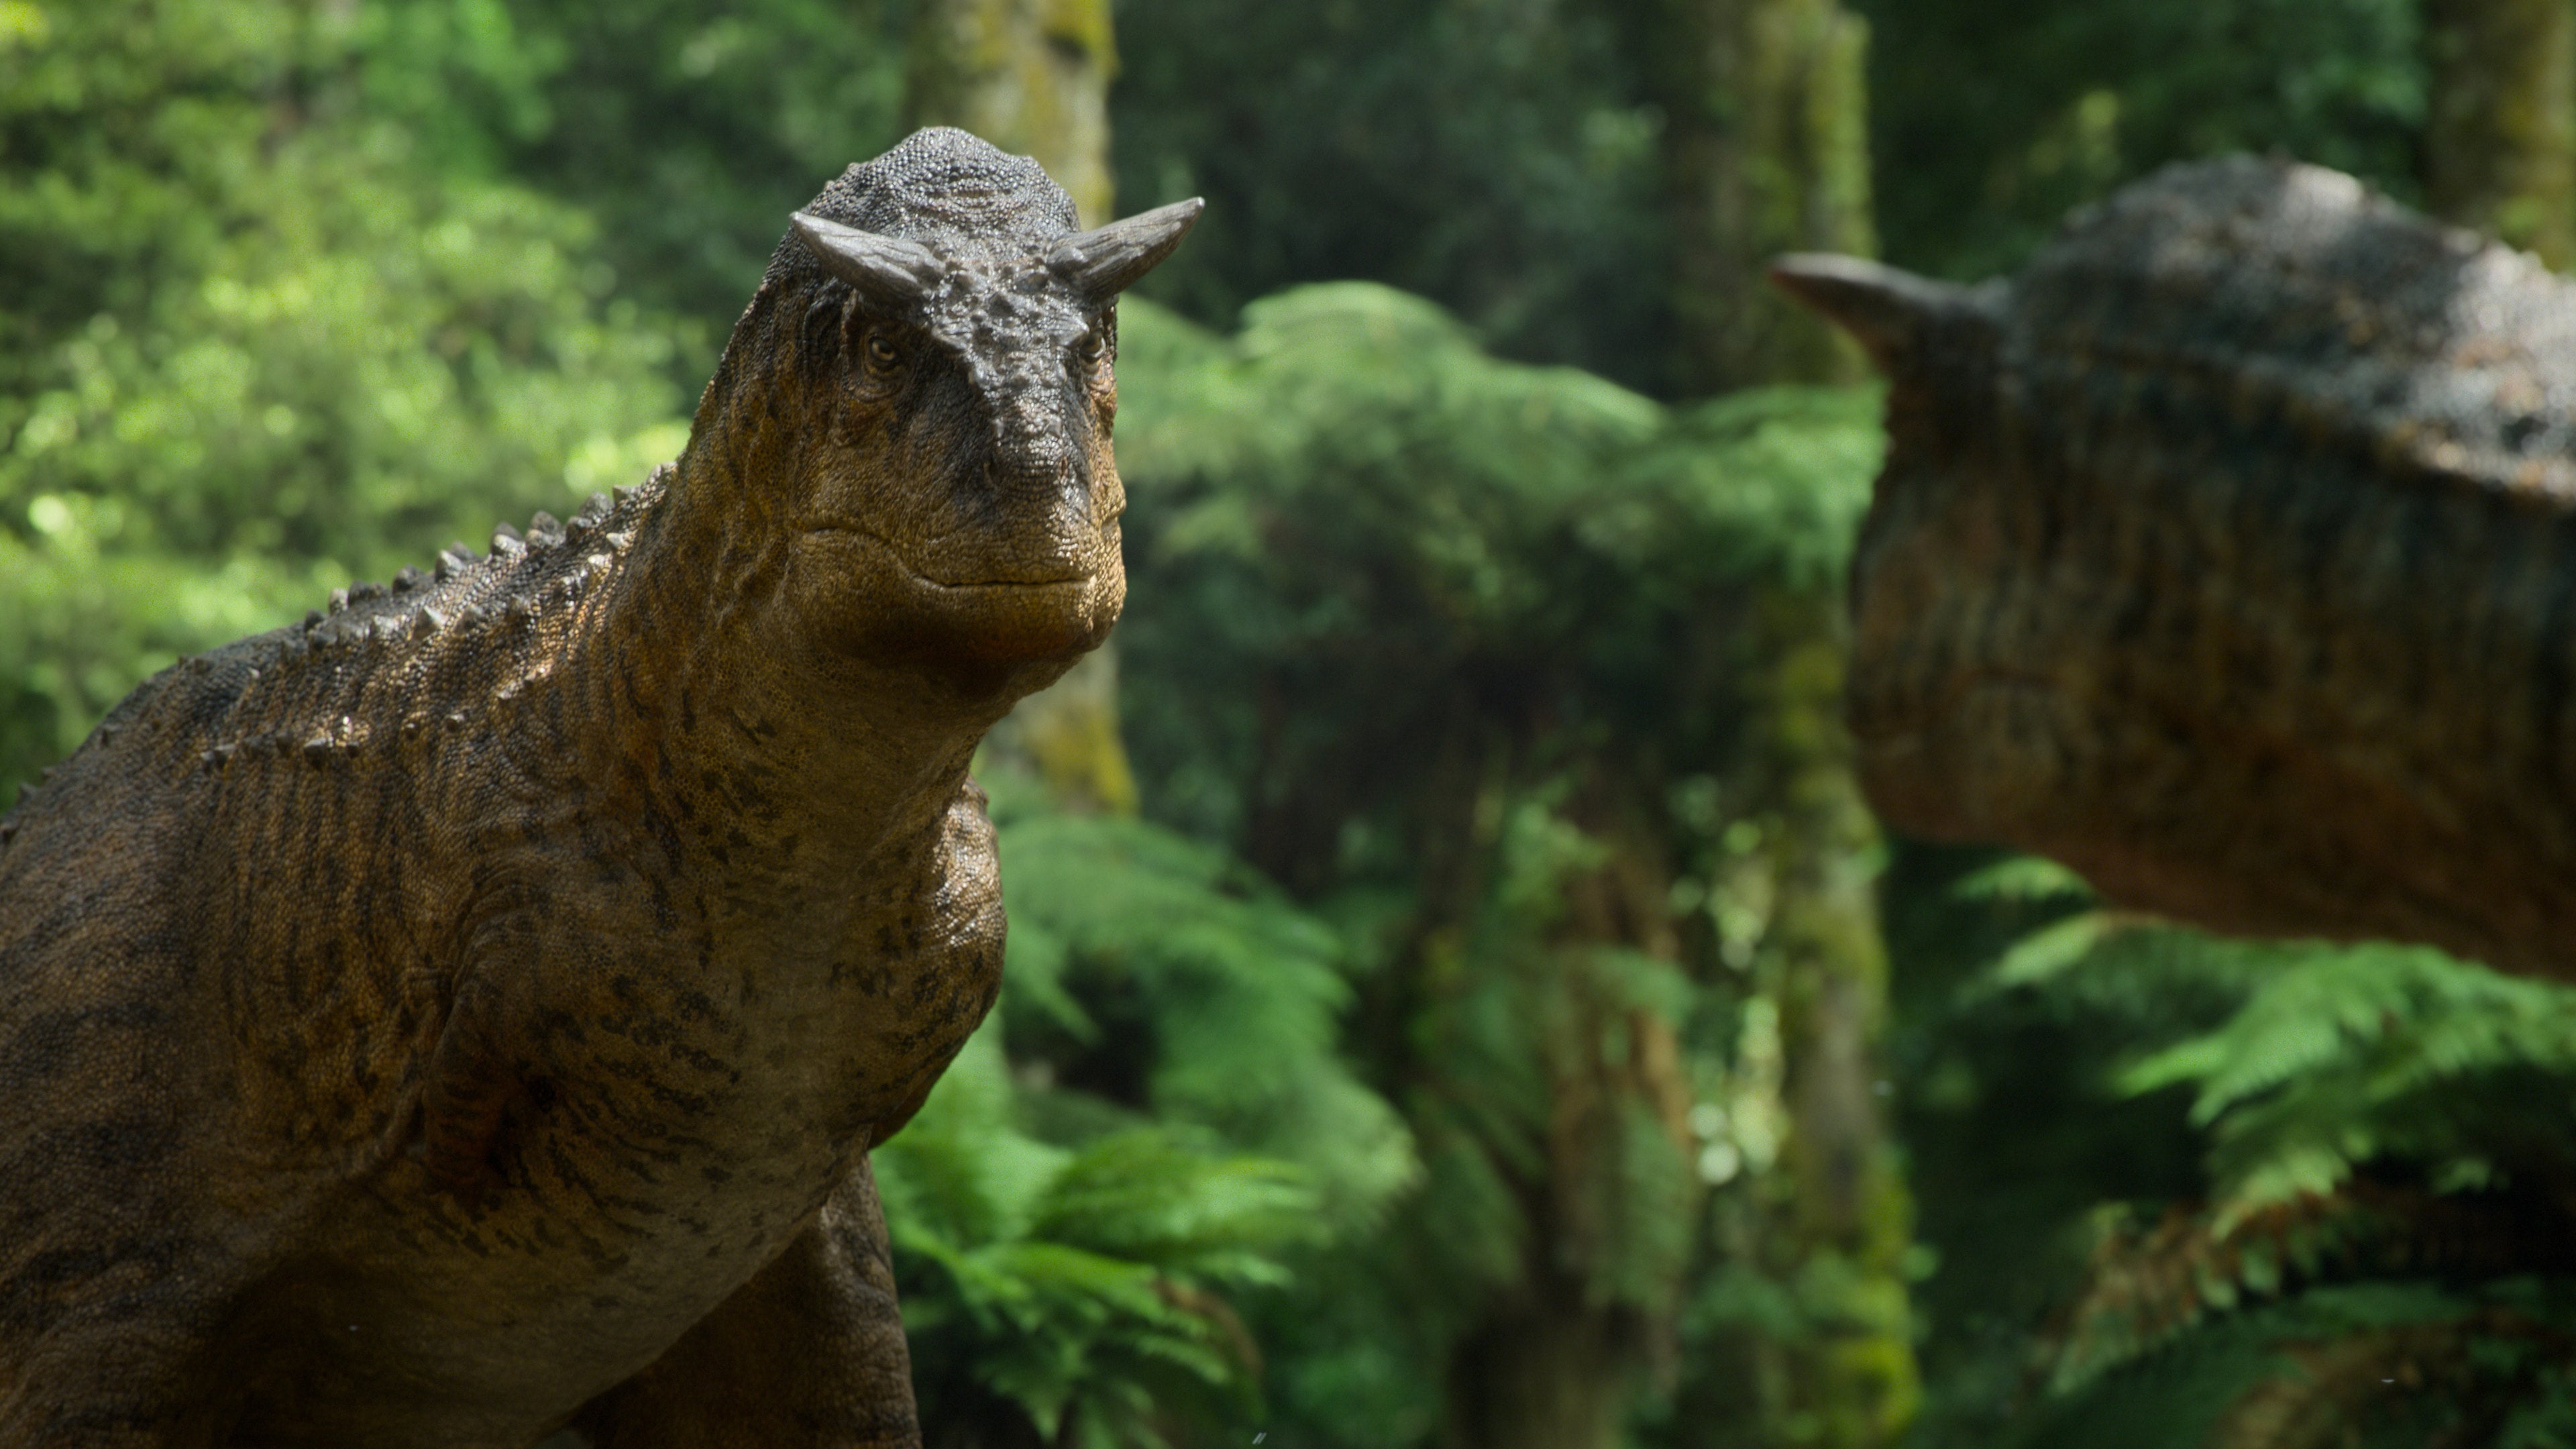 A male Carnotaurus looks at a potential mate. (Image: Apple)